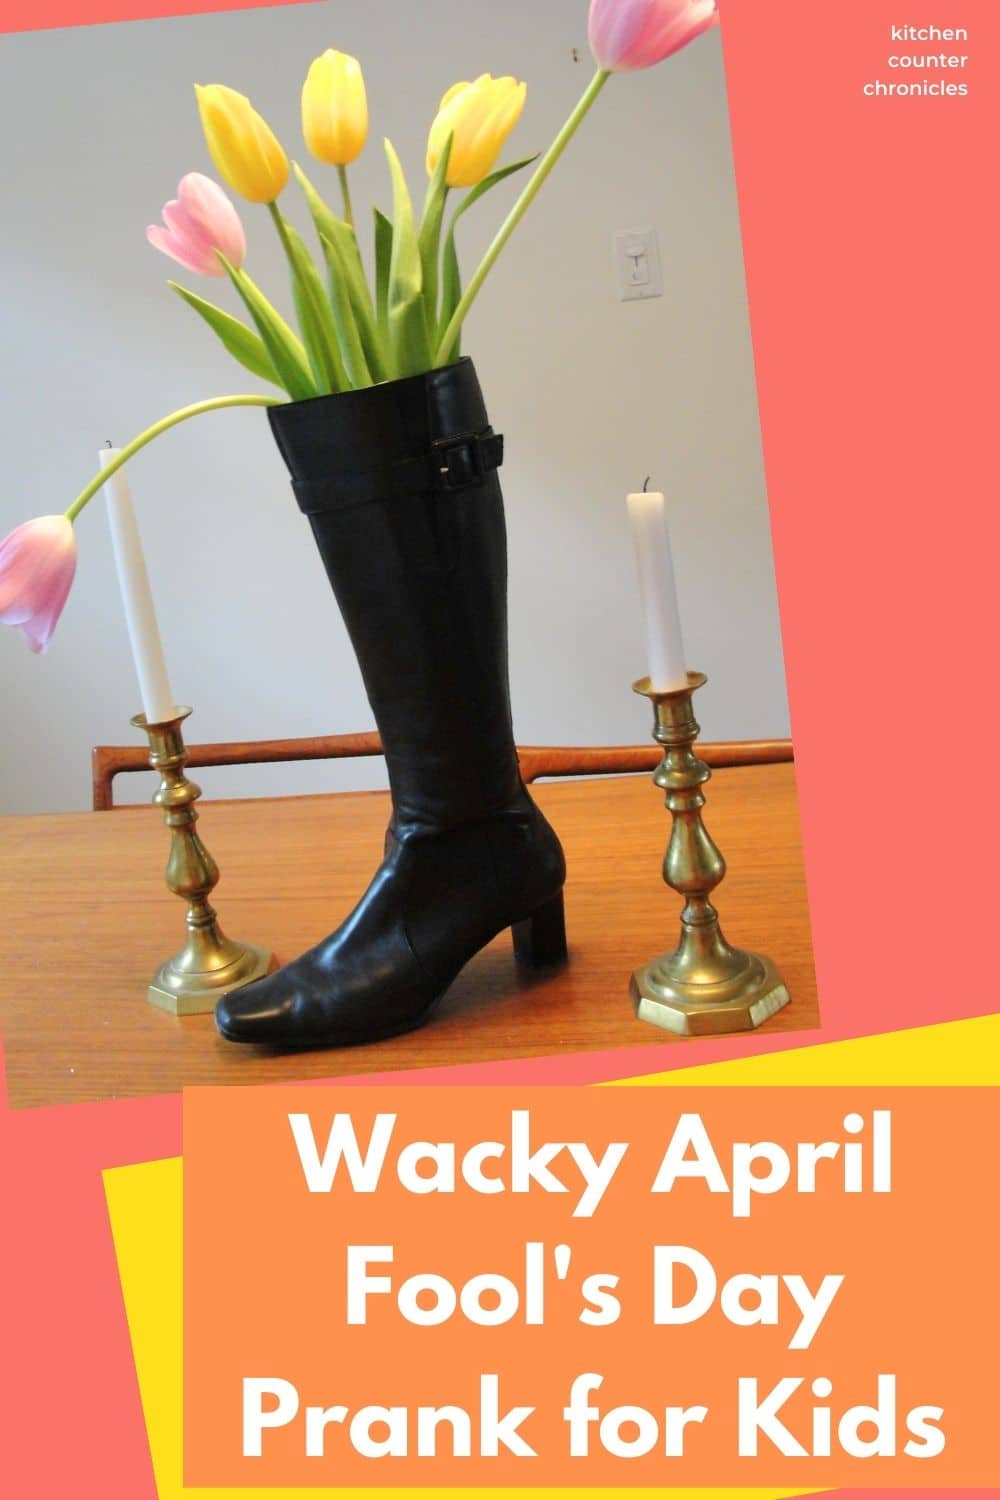 tall black boot filled with tulips on dining room table with title "Wacky April Fool's Day Prank for Kids"